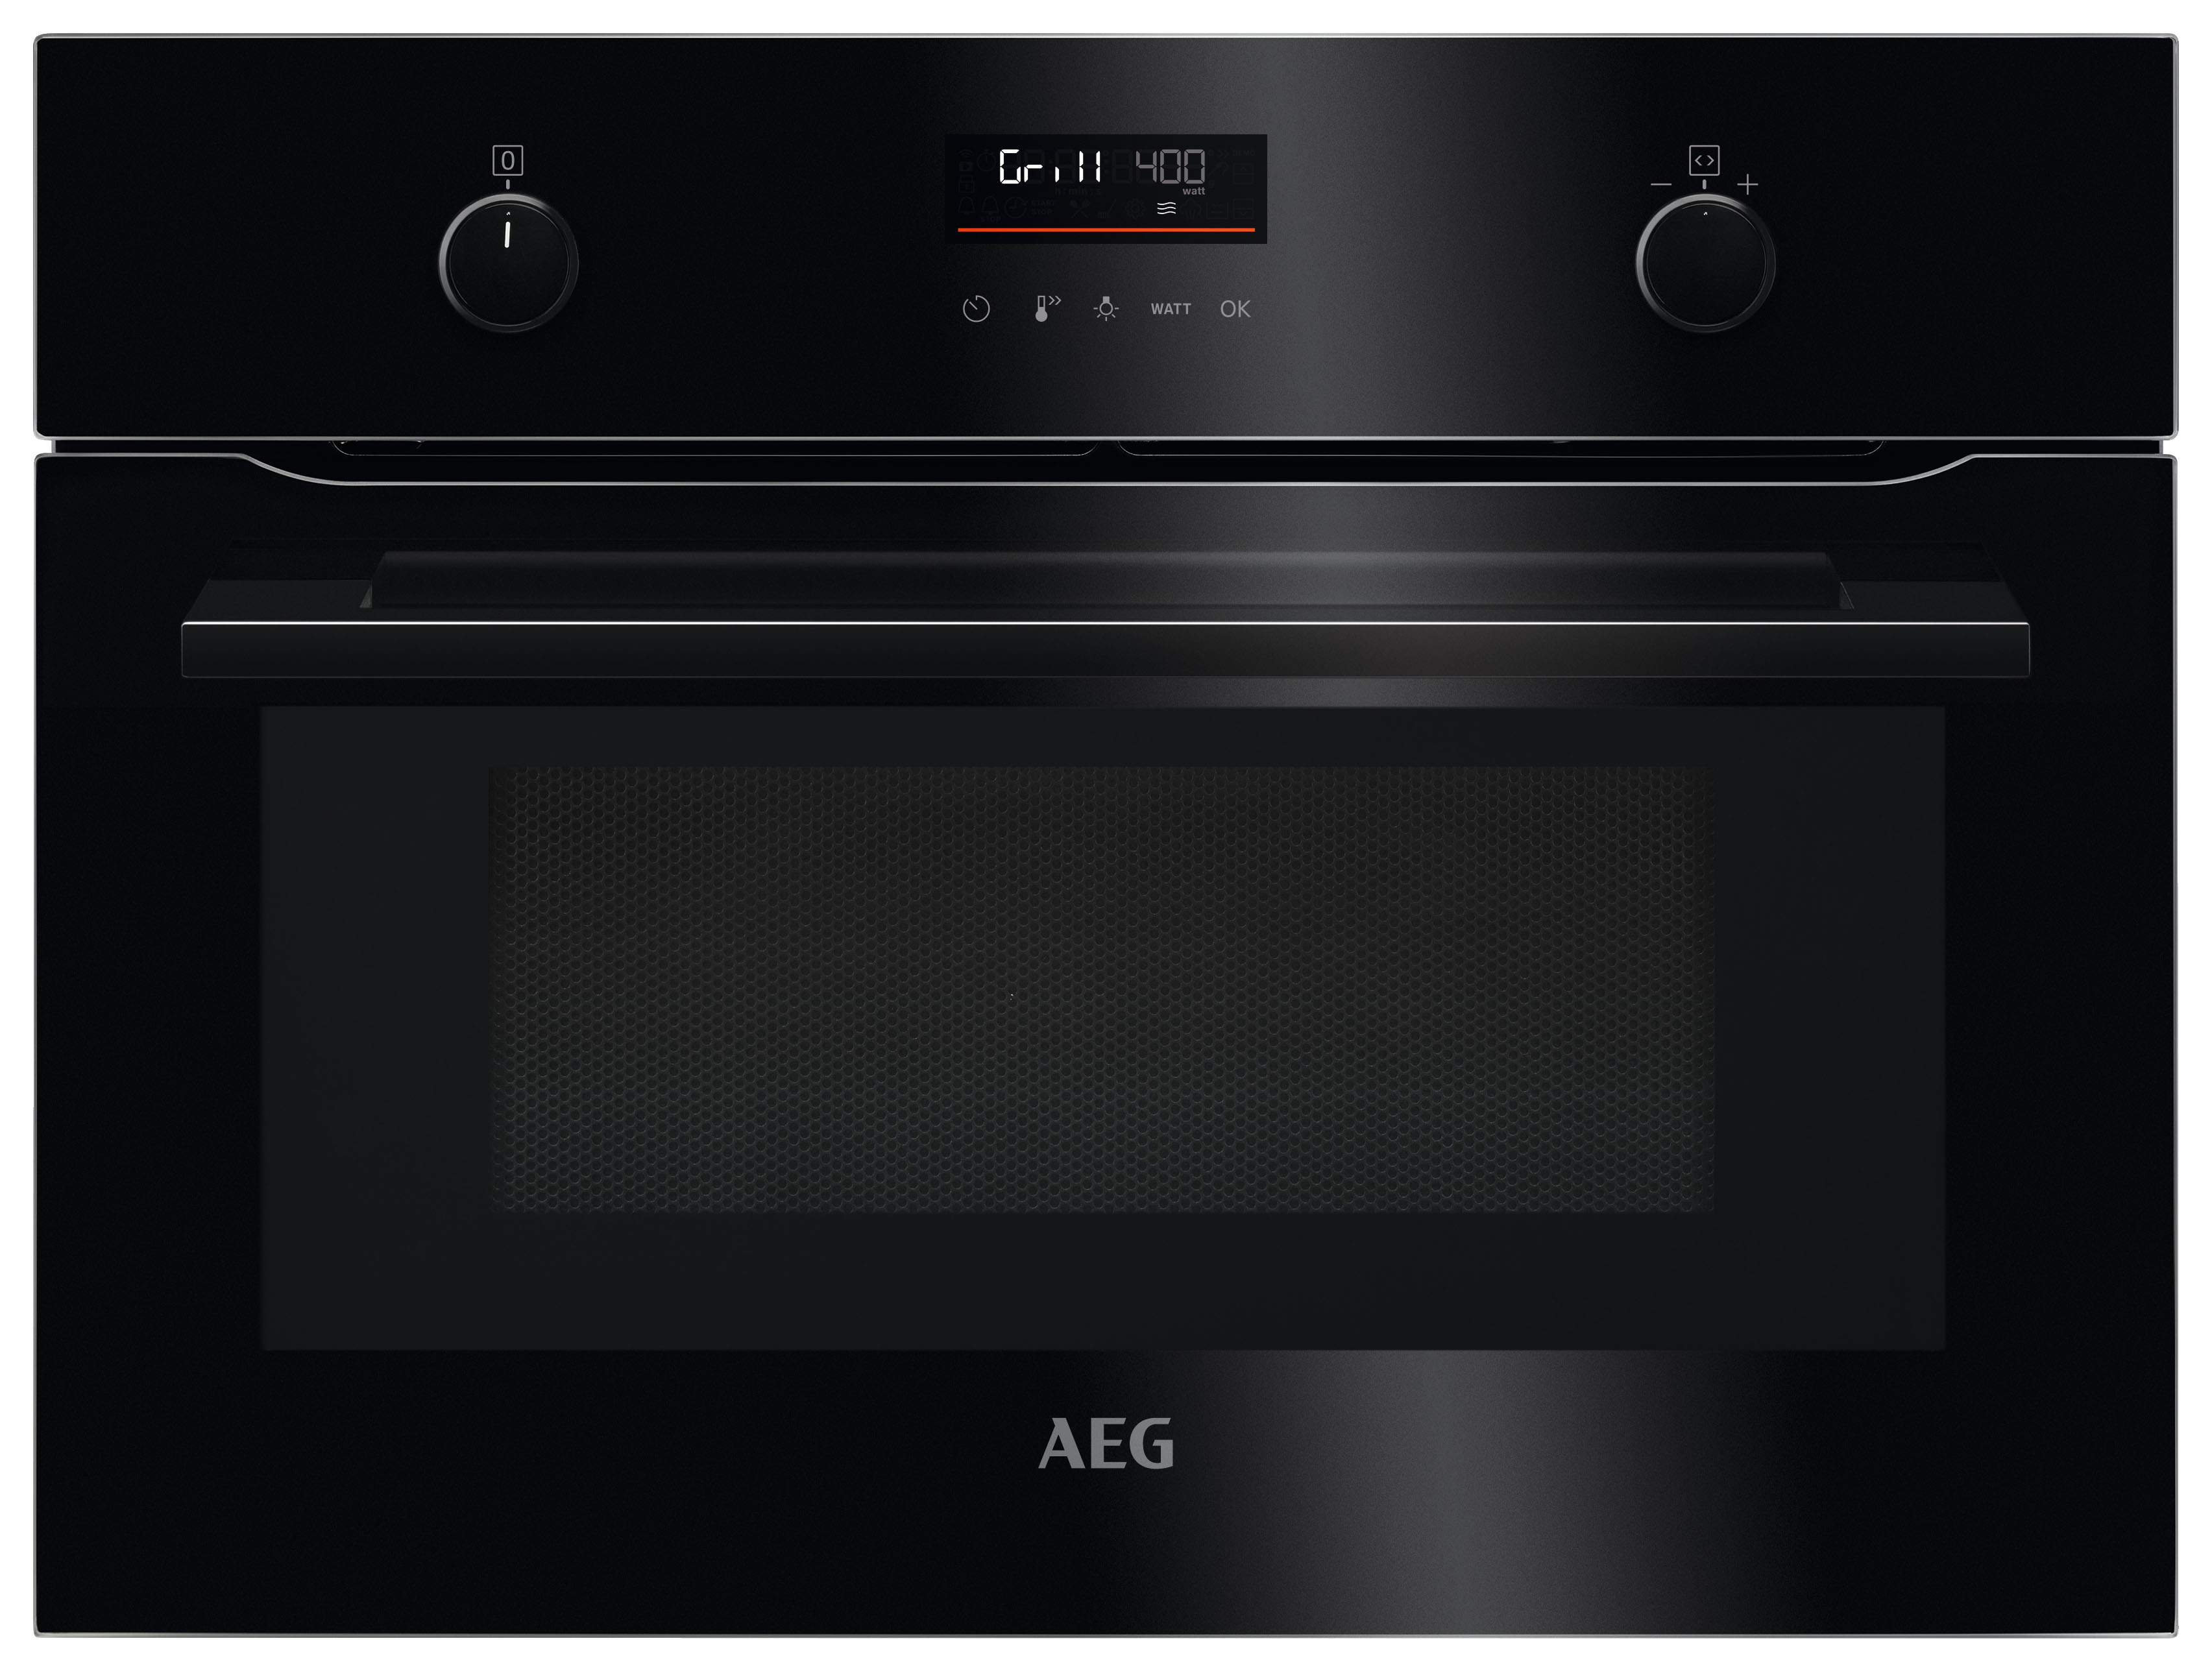 AEG KMK565060B 8000 Series CombiQuick Convection Oven with Microwave Function & Clean Enamel Cleaning - Black